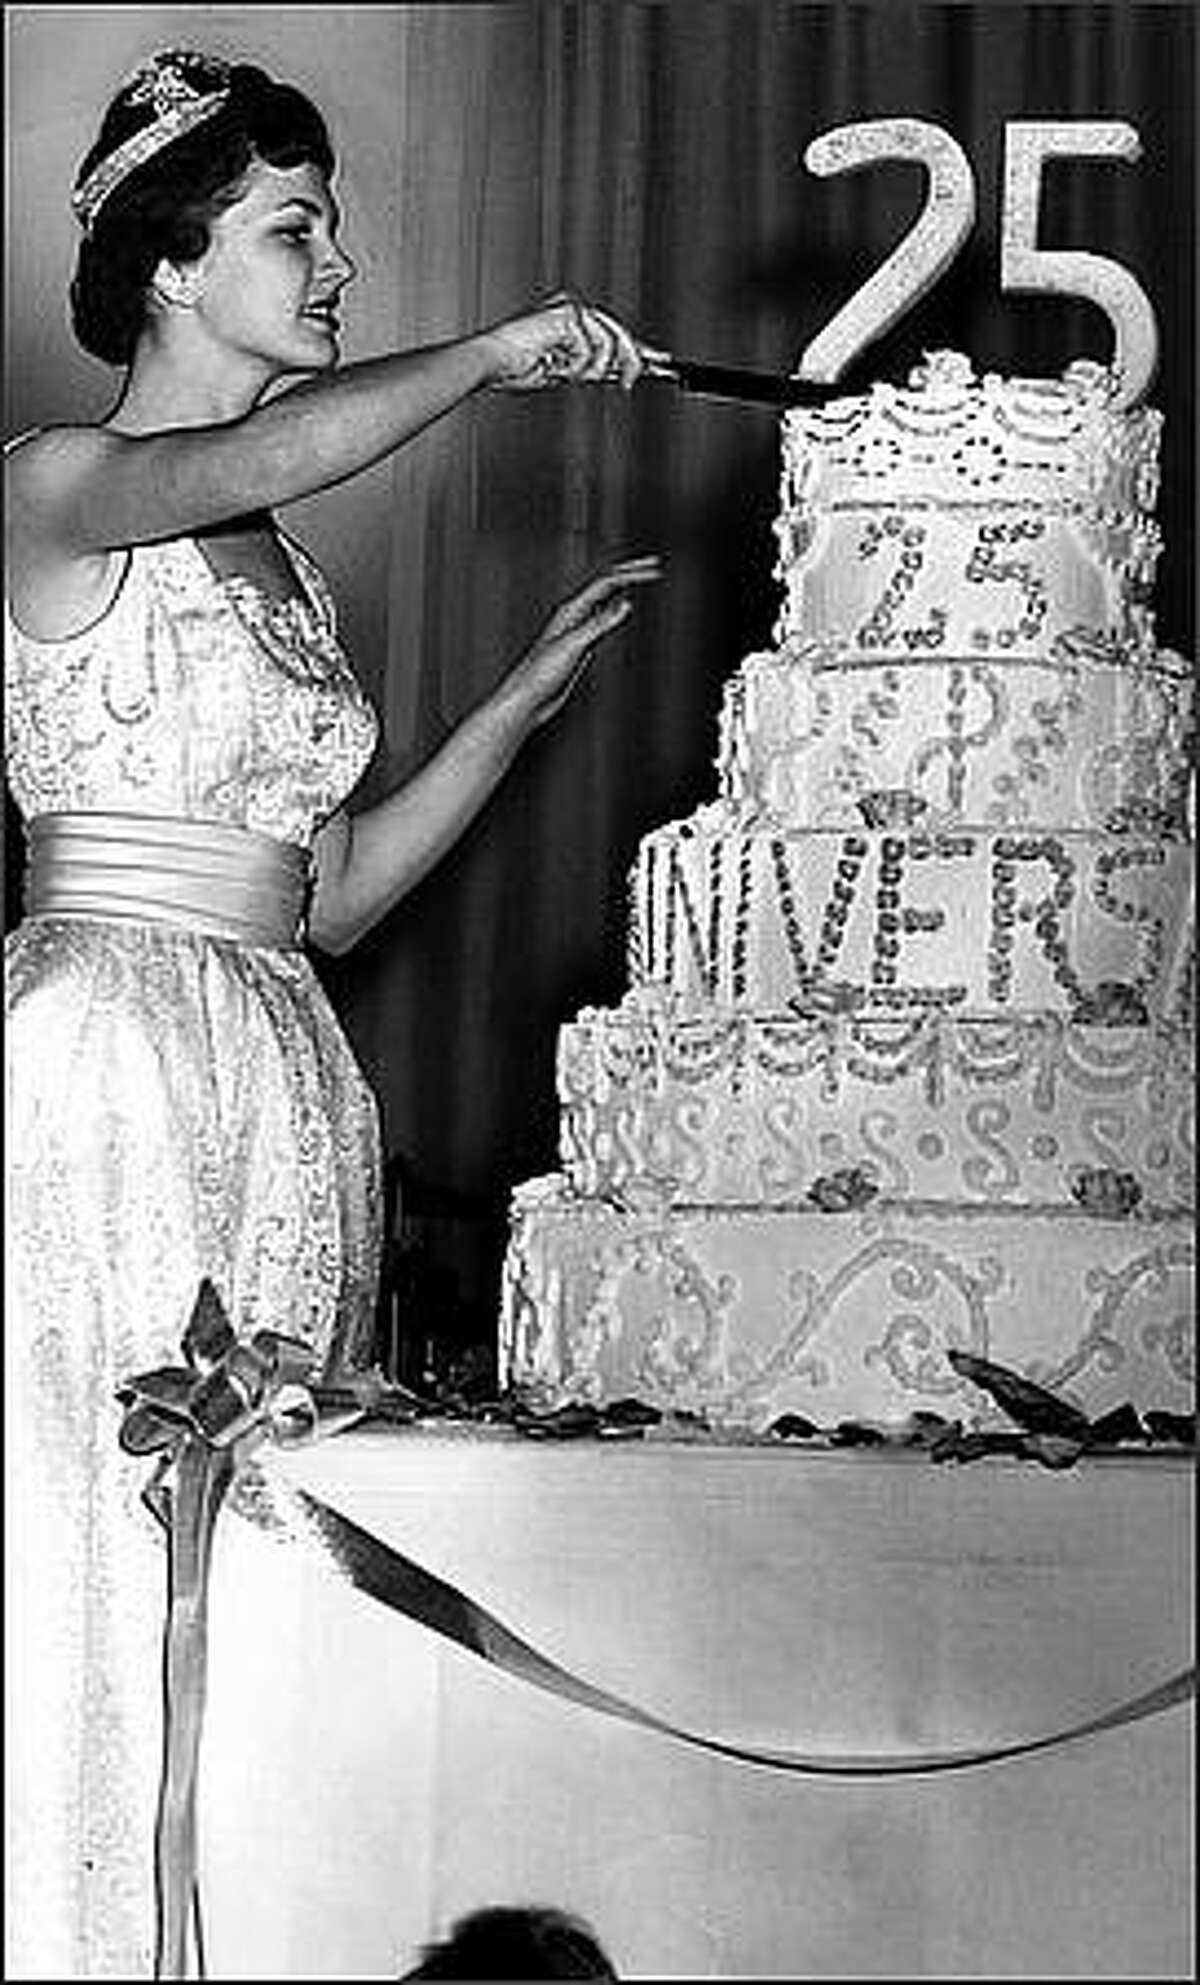 Seafair Queen Diane Gray carves the mountainous cake which marked the 25th anniversary of the popular sports banquet conceived by Post-Intelligencer Sports Editor Royal Brougham